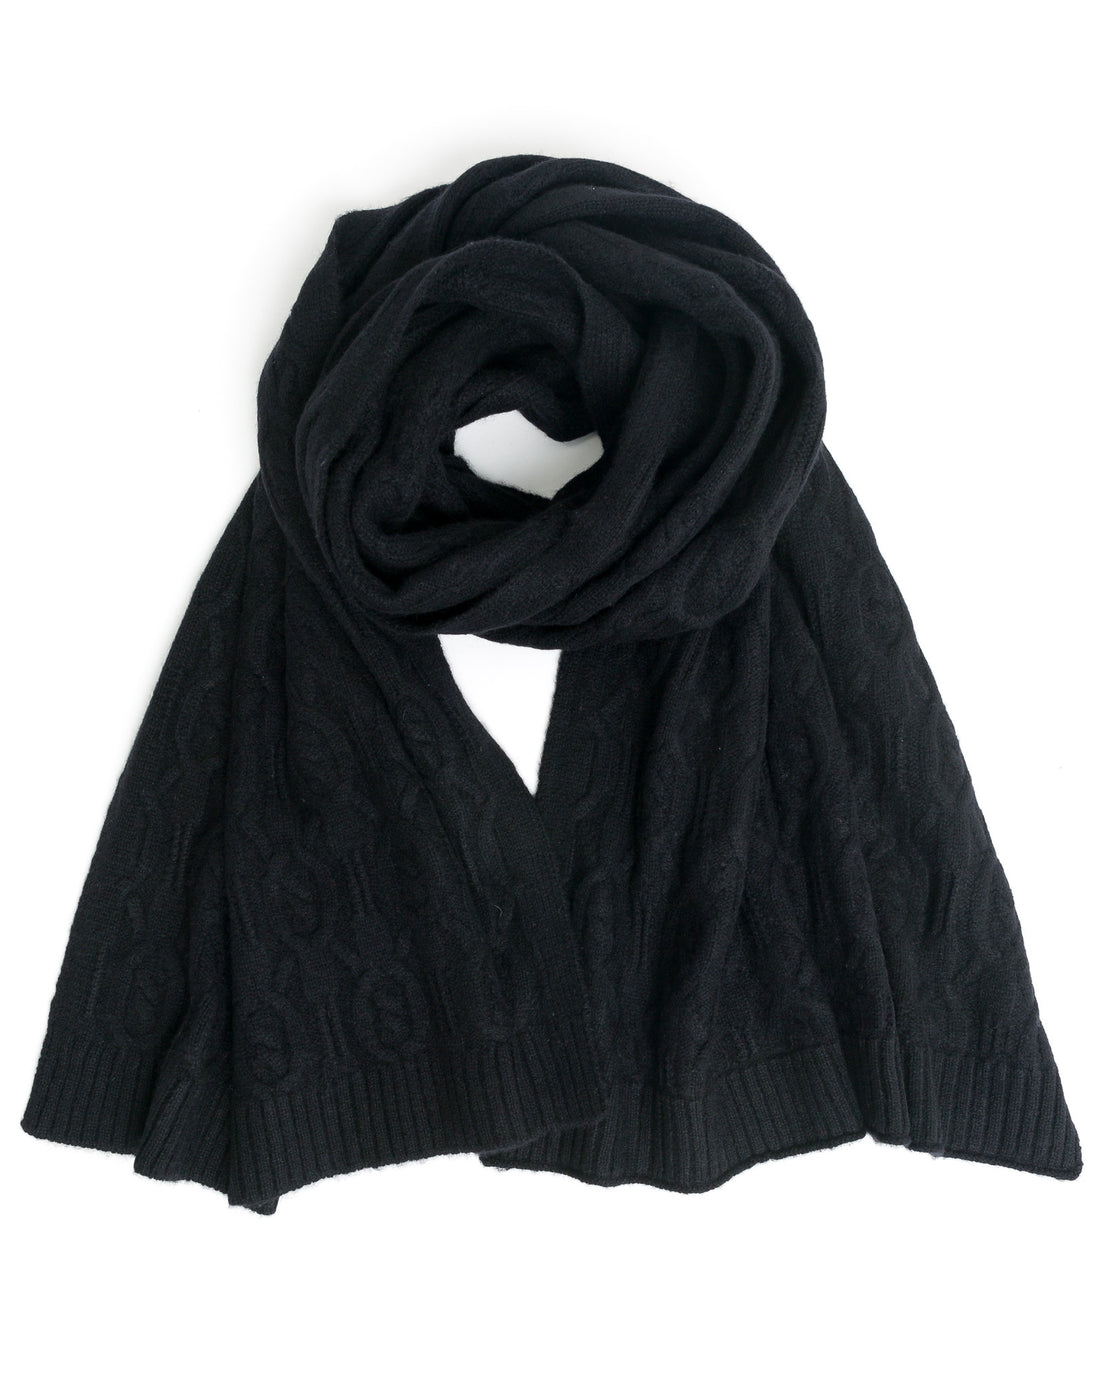 ACCESSORIES - Cable Cashmere Scarf